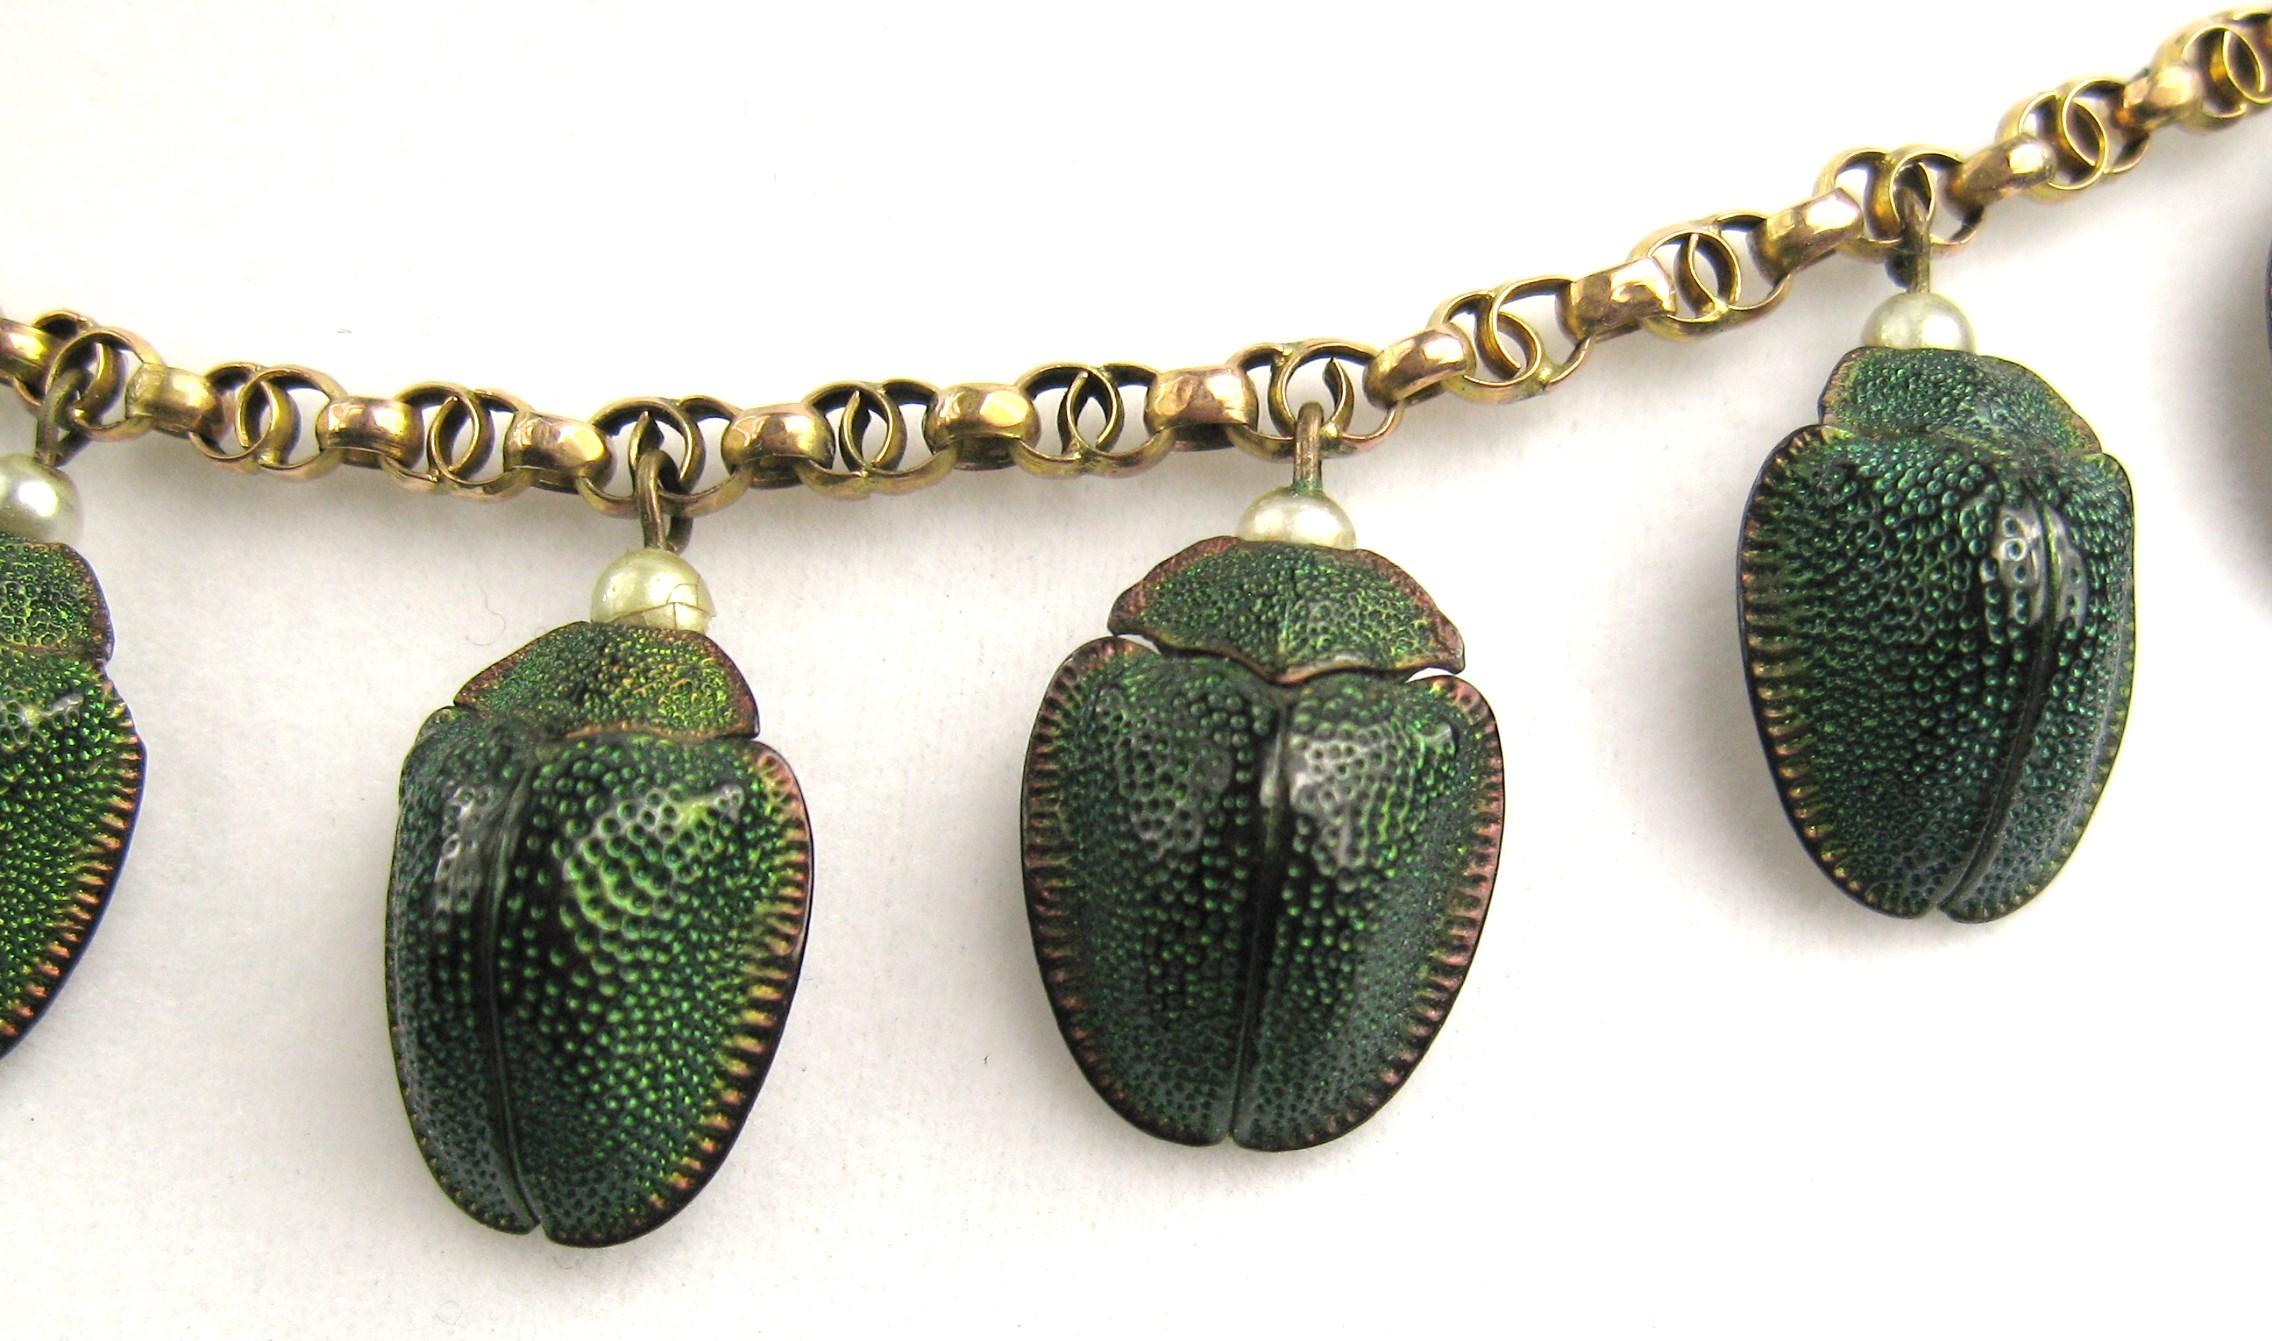 Women's Antique 9 Karat Gold Scarab Beetle Necklace with Pearls For Sale